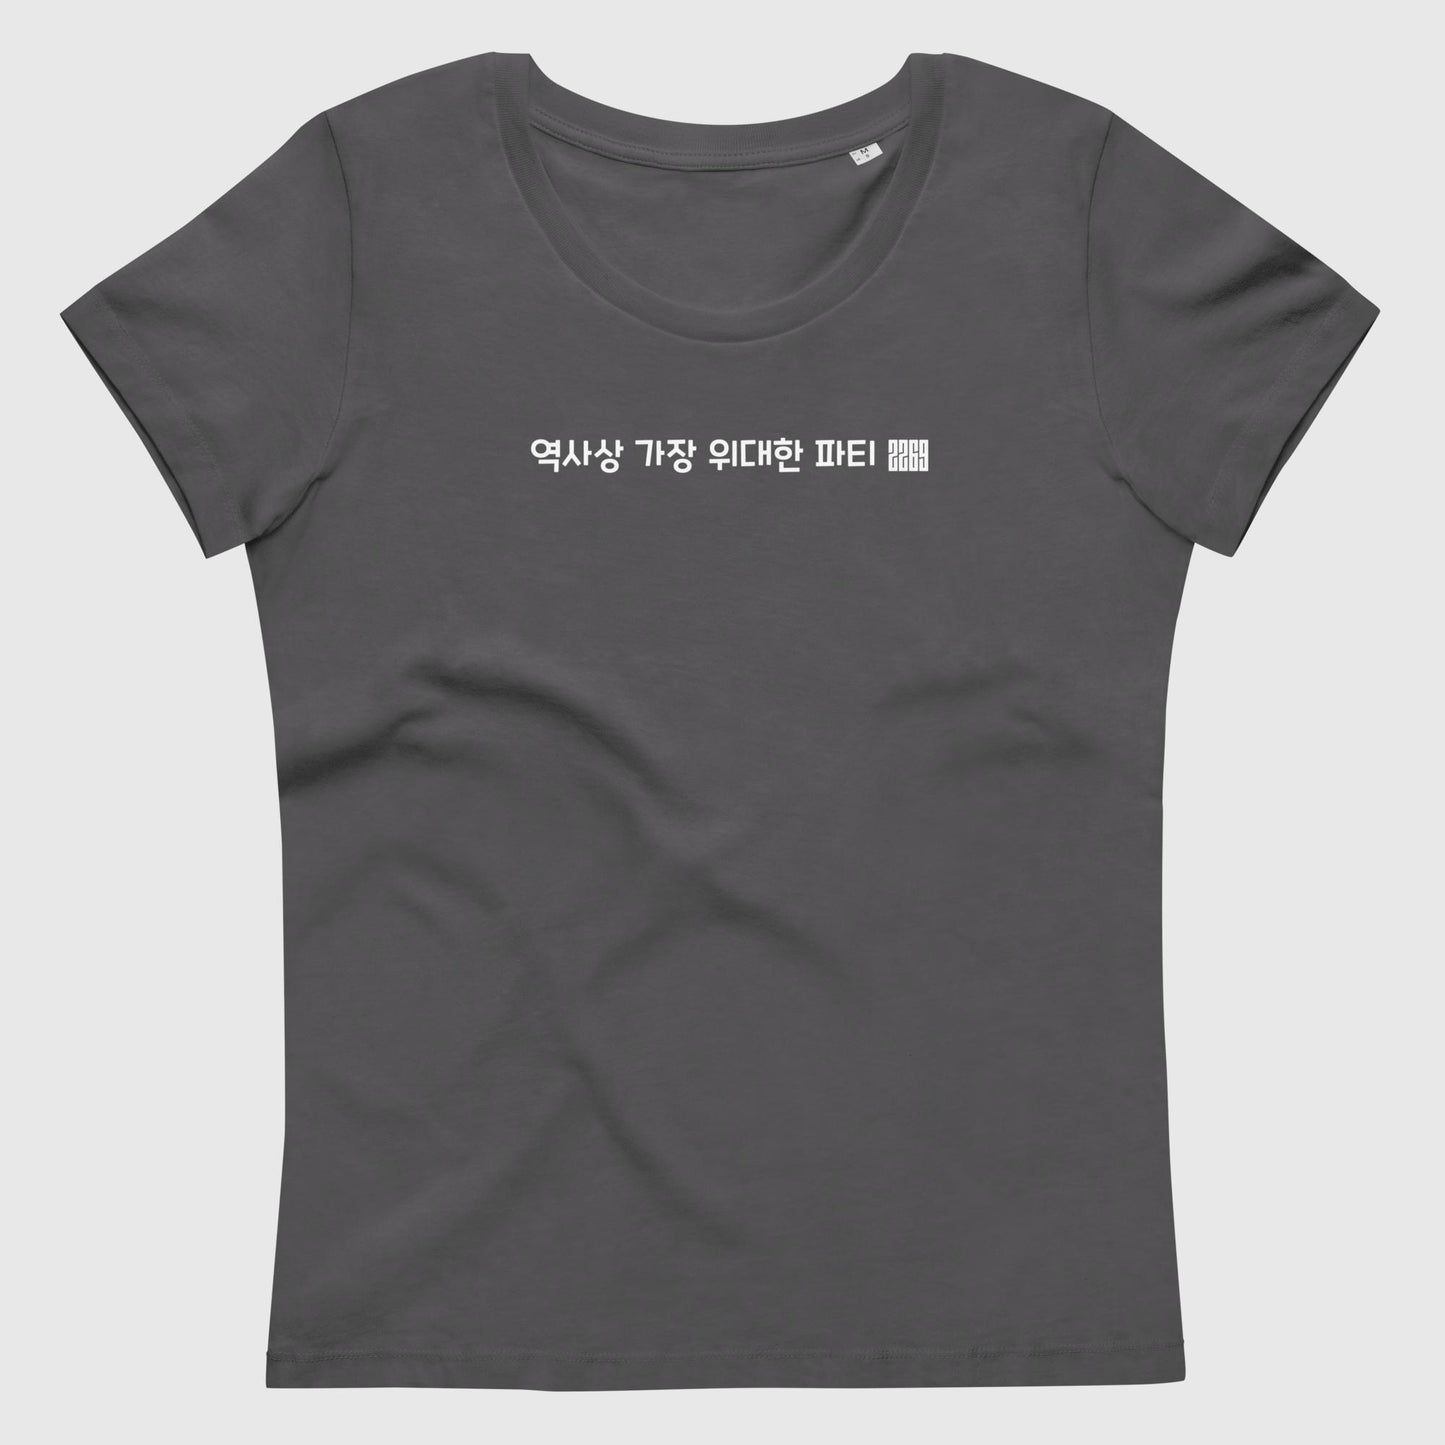 Women's anthracite fitted organic cotton t-shirt with Korean 2269 party message